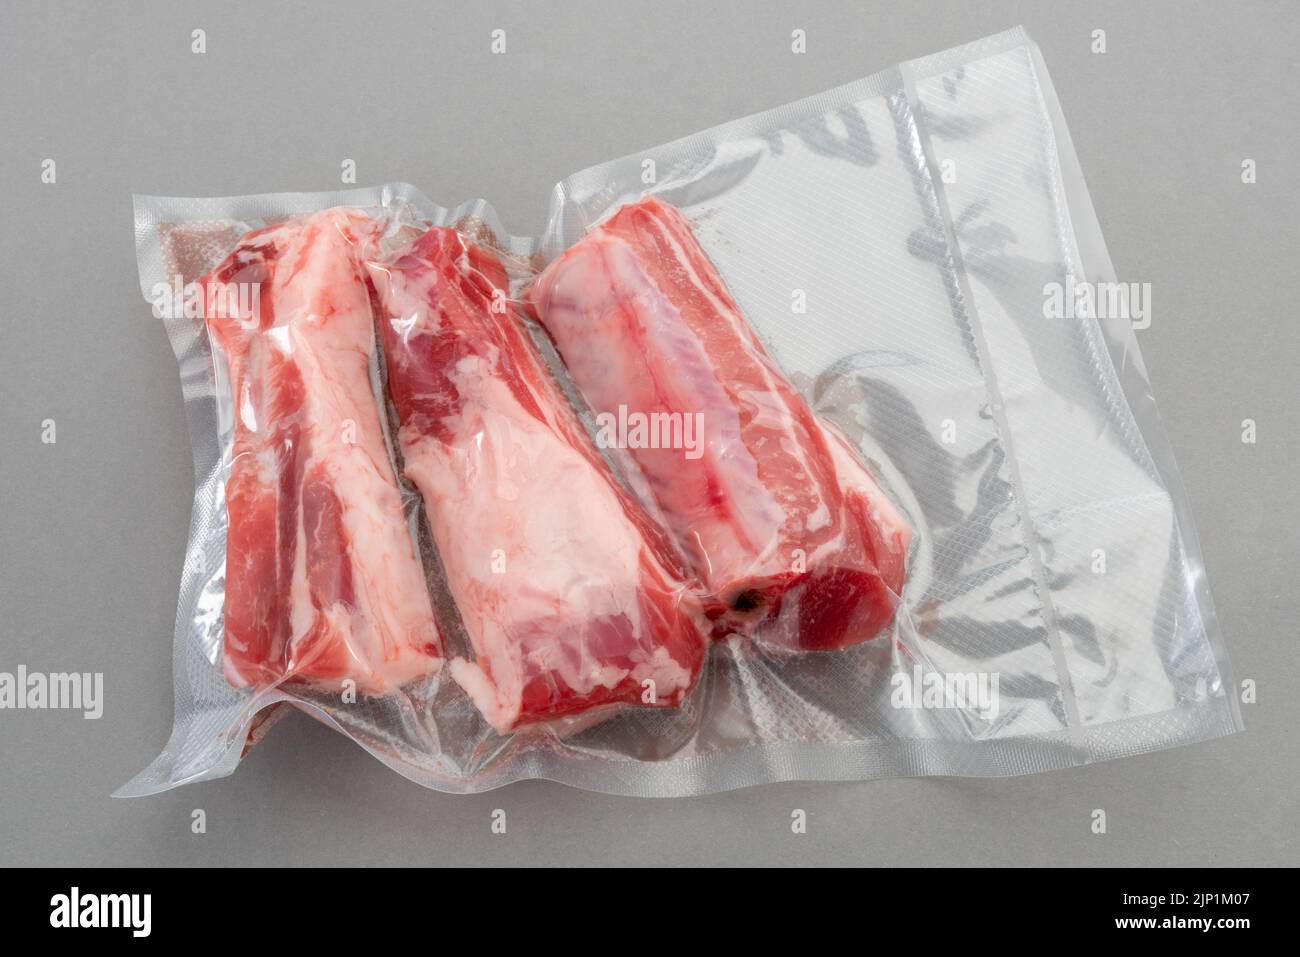 Pork ribs in vacuum packed sealed for sous vide cooking on gray background in top view. Stock Photo